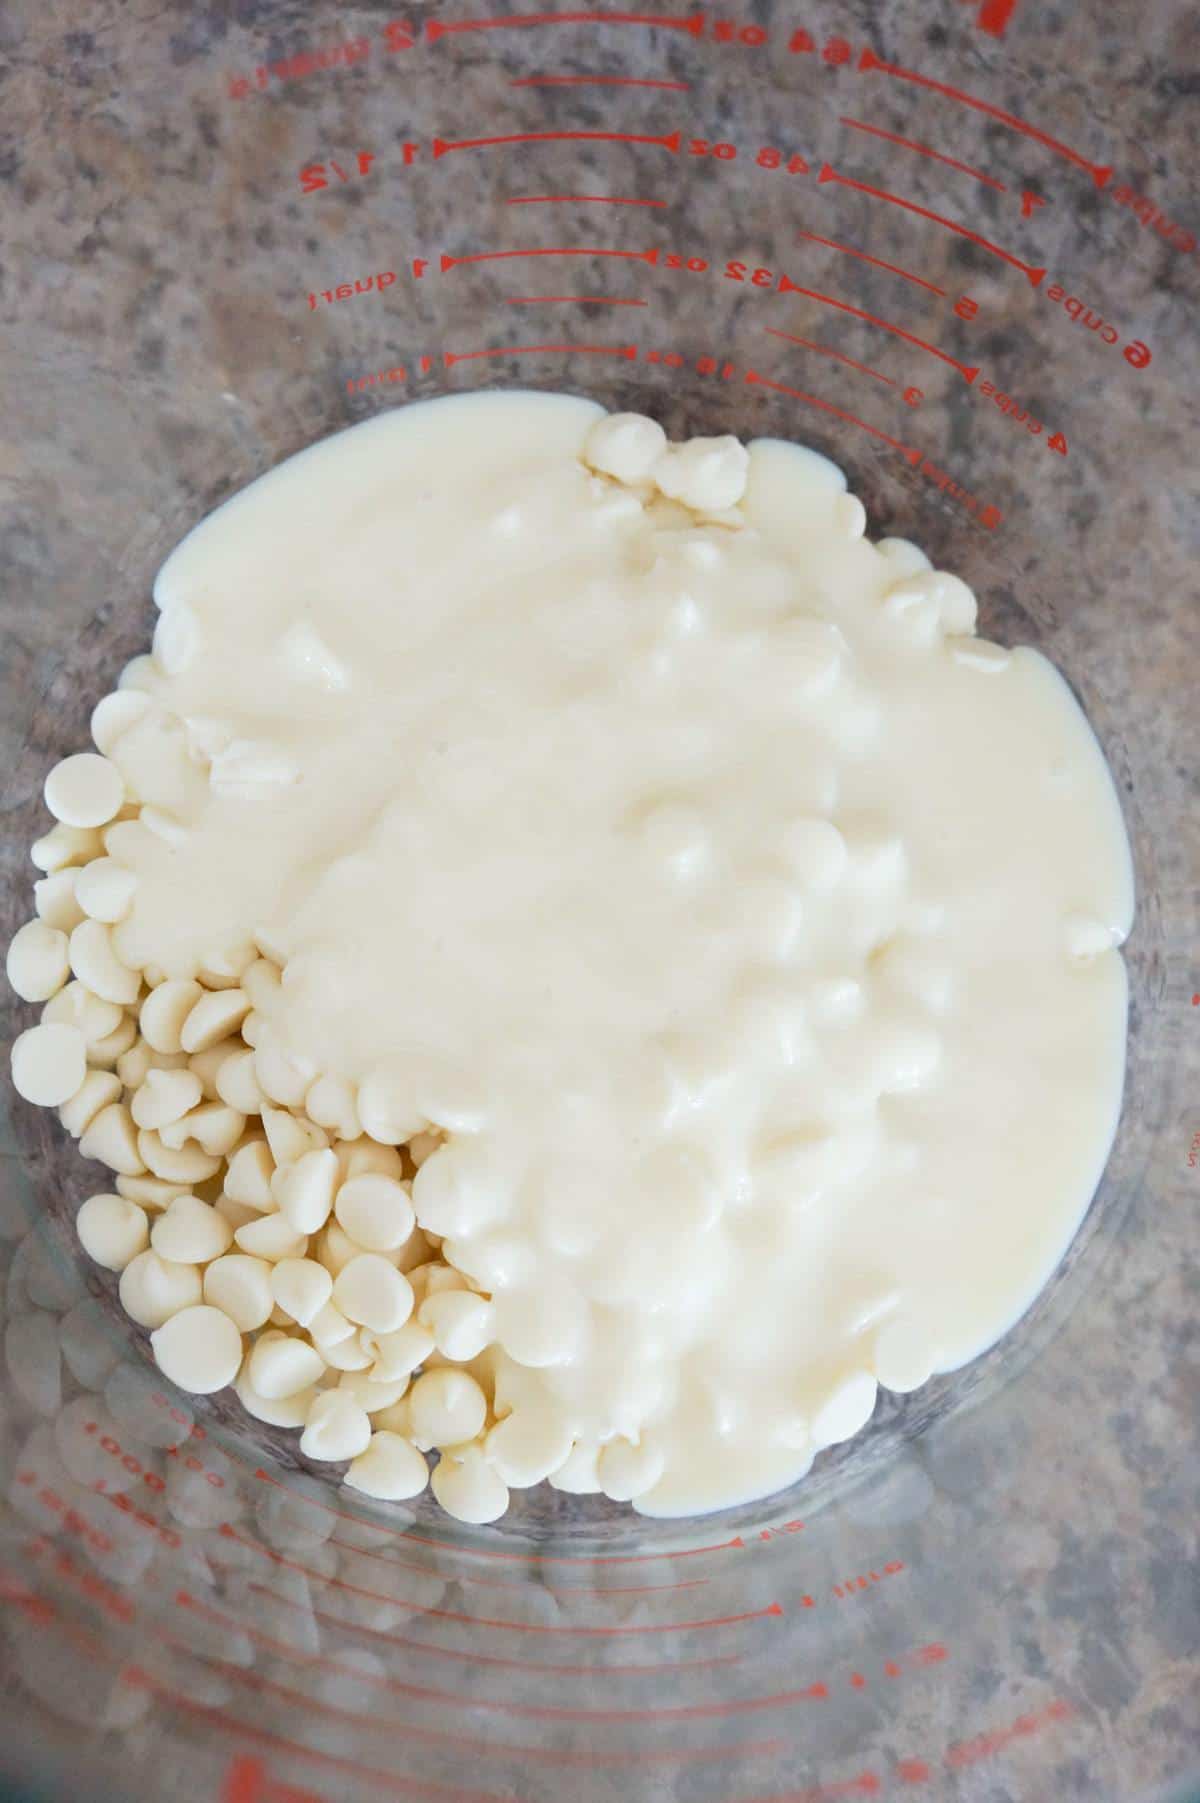 sweetened condensed milk and white chocolate chips in a glass bowl